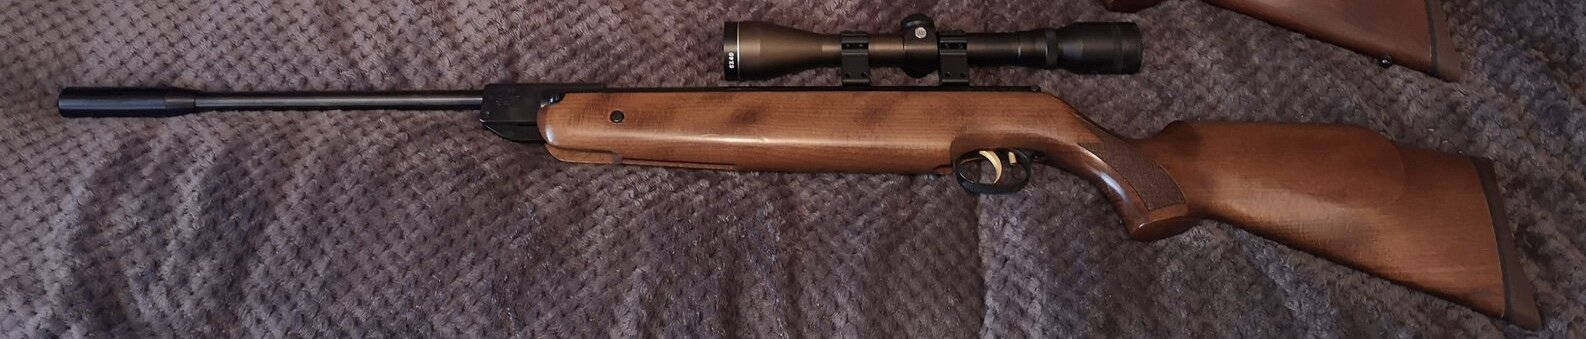 .22 hw95 for sale NOW SOLD